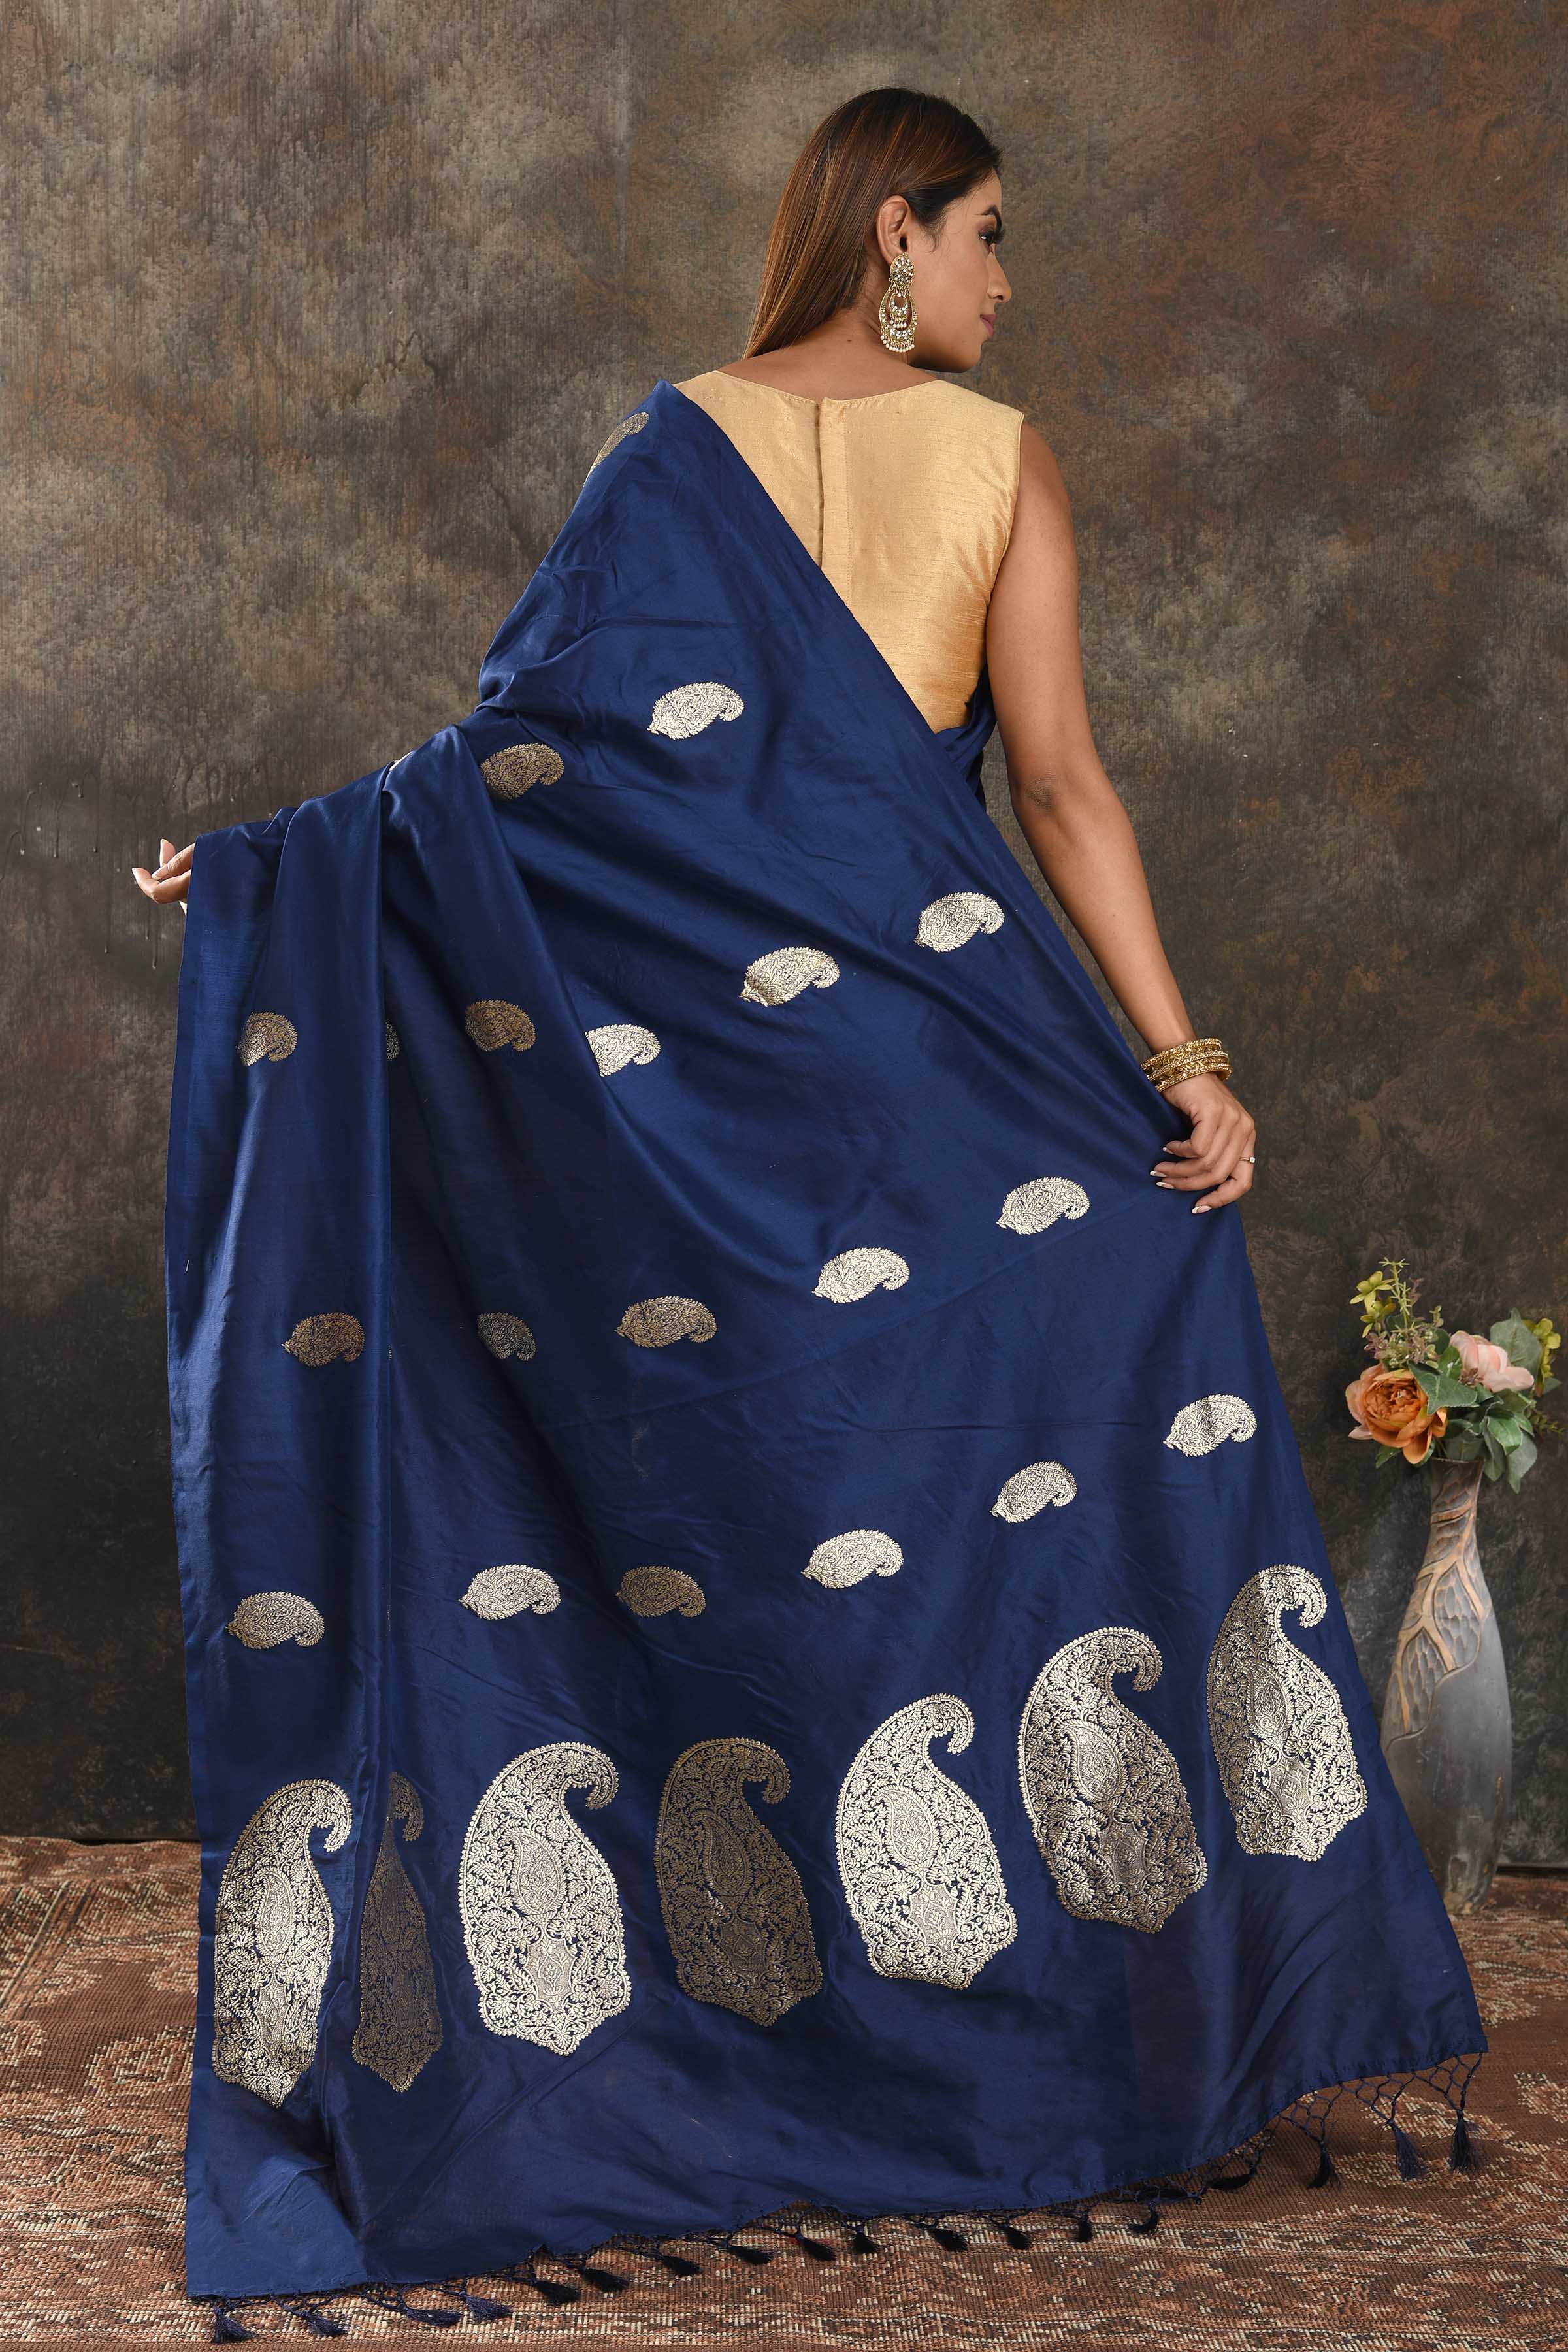 Shop beautiful indigo blue silk sari online in USA with silver zari paisley buta. Be vision of elegance on special occasions in exquisite designer sarees, handwoven sarees, georgette sarees, embroidered sarees, Banarasi sarees from Pure Elegance Indian saree store in USA.-back